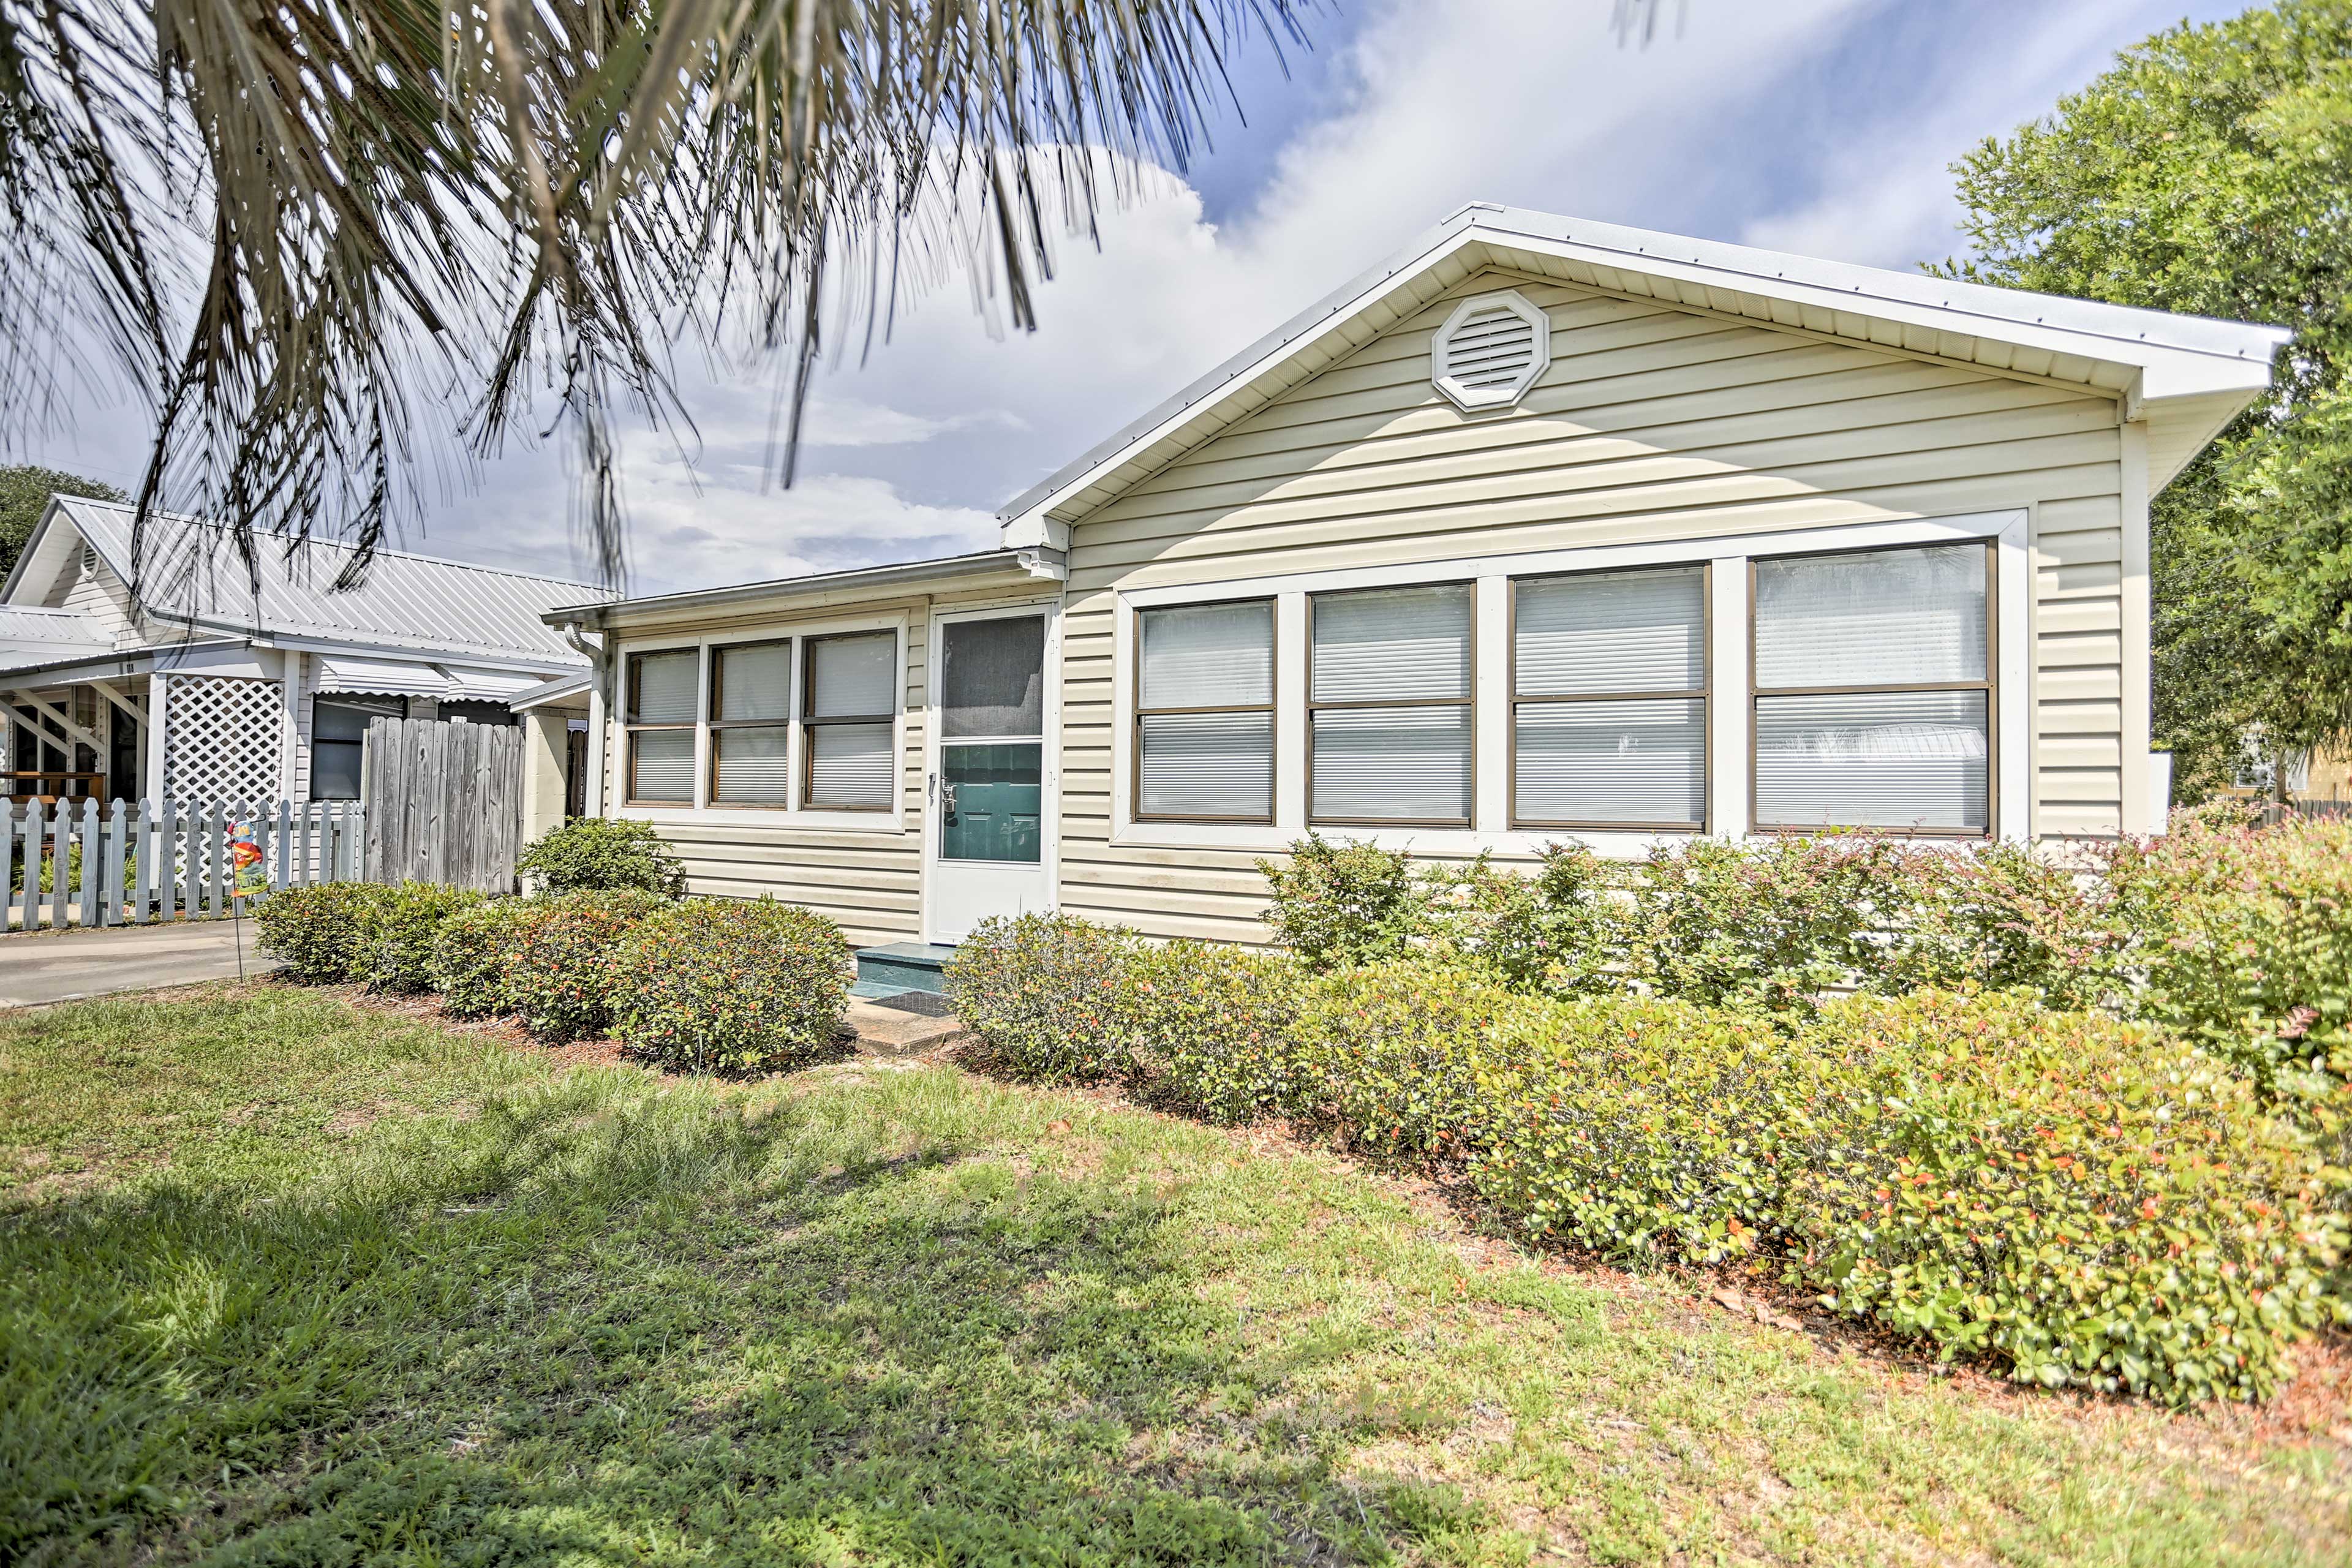 With 2 bedrooms and 2 bathrooms, this Florida getaway accommodates 7 guests.